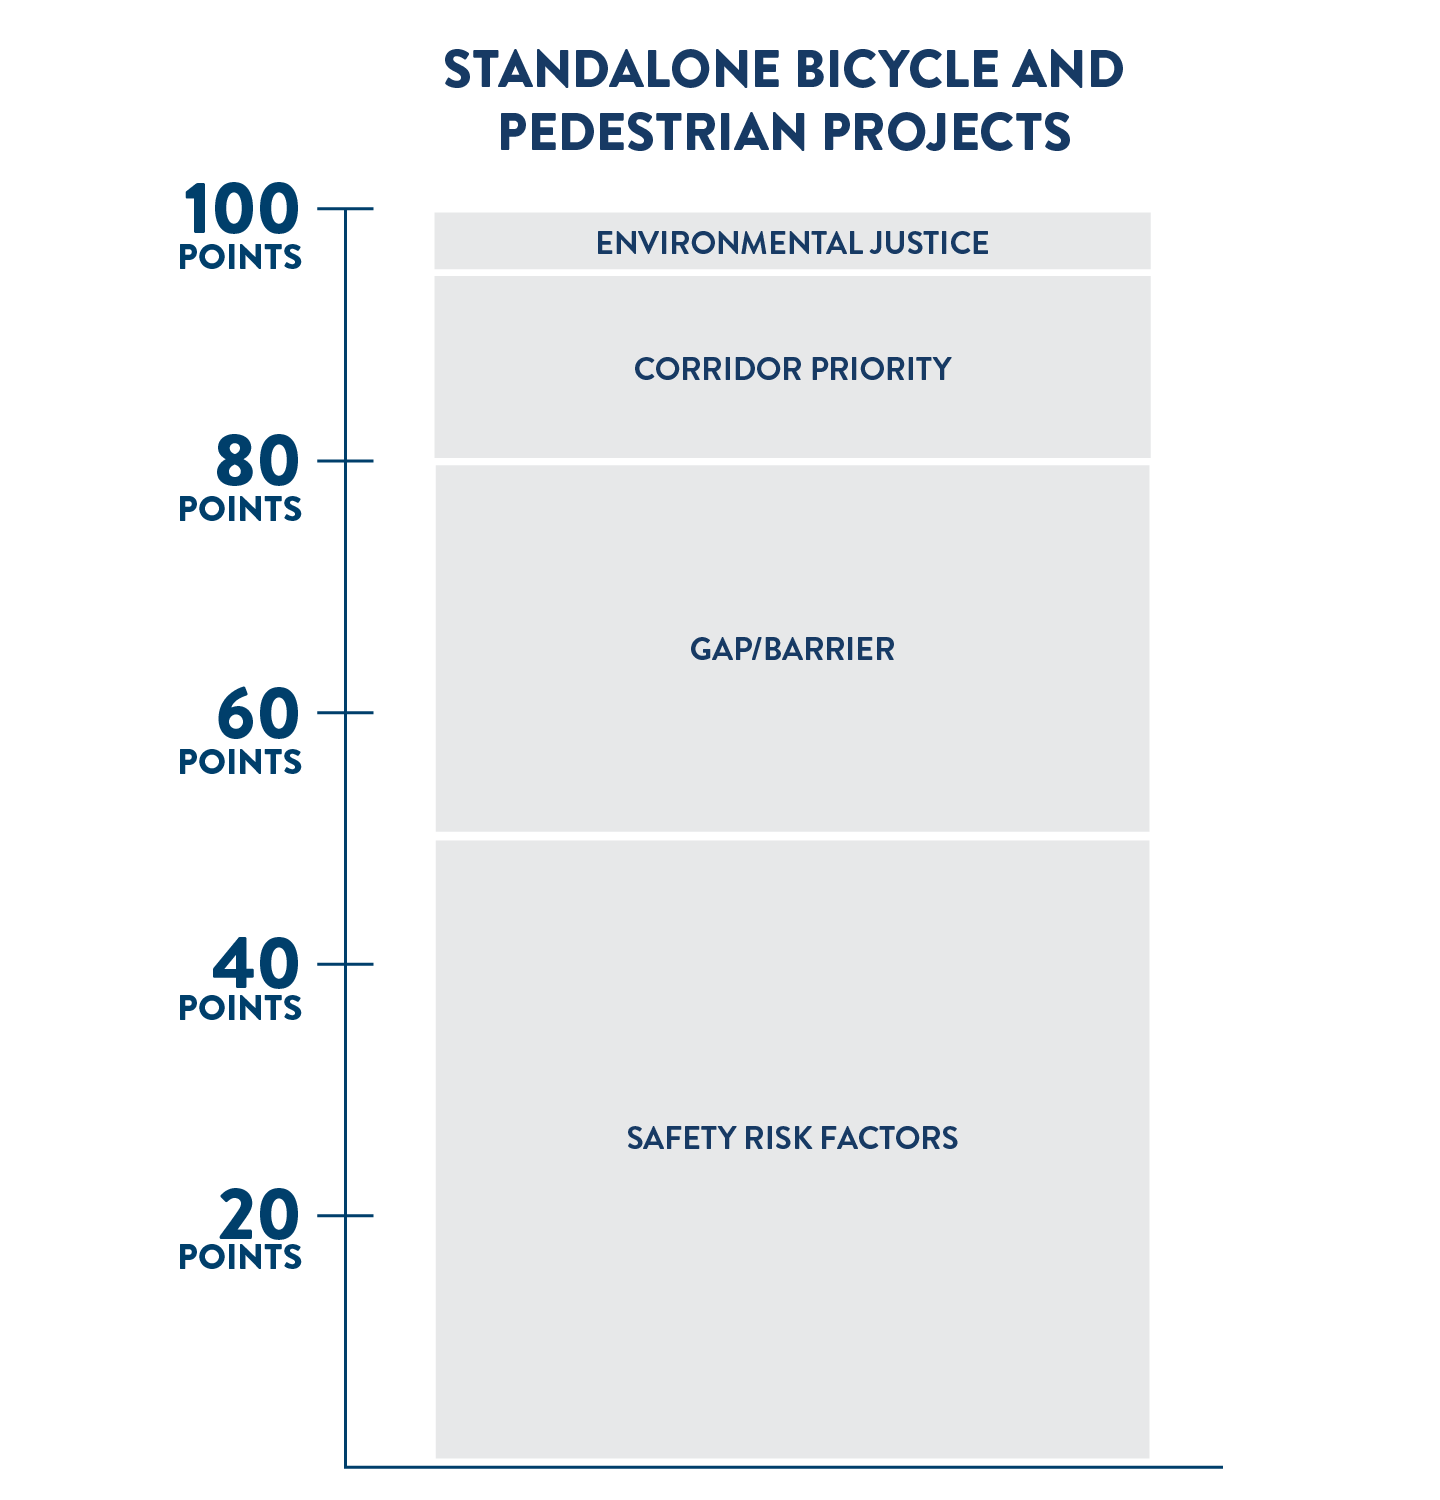 Scoring criteria for standalone bicycle and pedestrian projects. Out of 100 possible points, 50 points are based on safety risk factors, 30 points are based on gaps and barriers, 35 points are based on corridor priority, and 5 points are based on whether the project will benefit an environmental justice population.